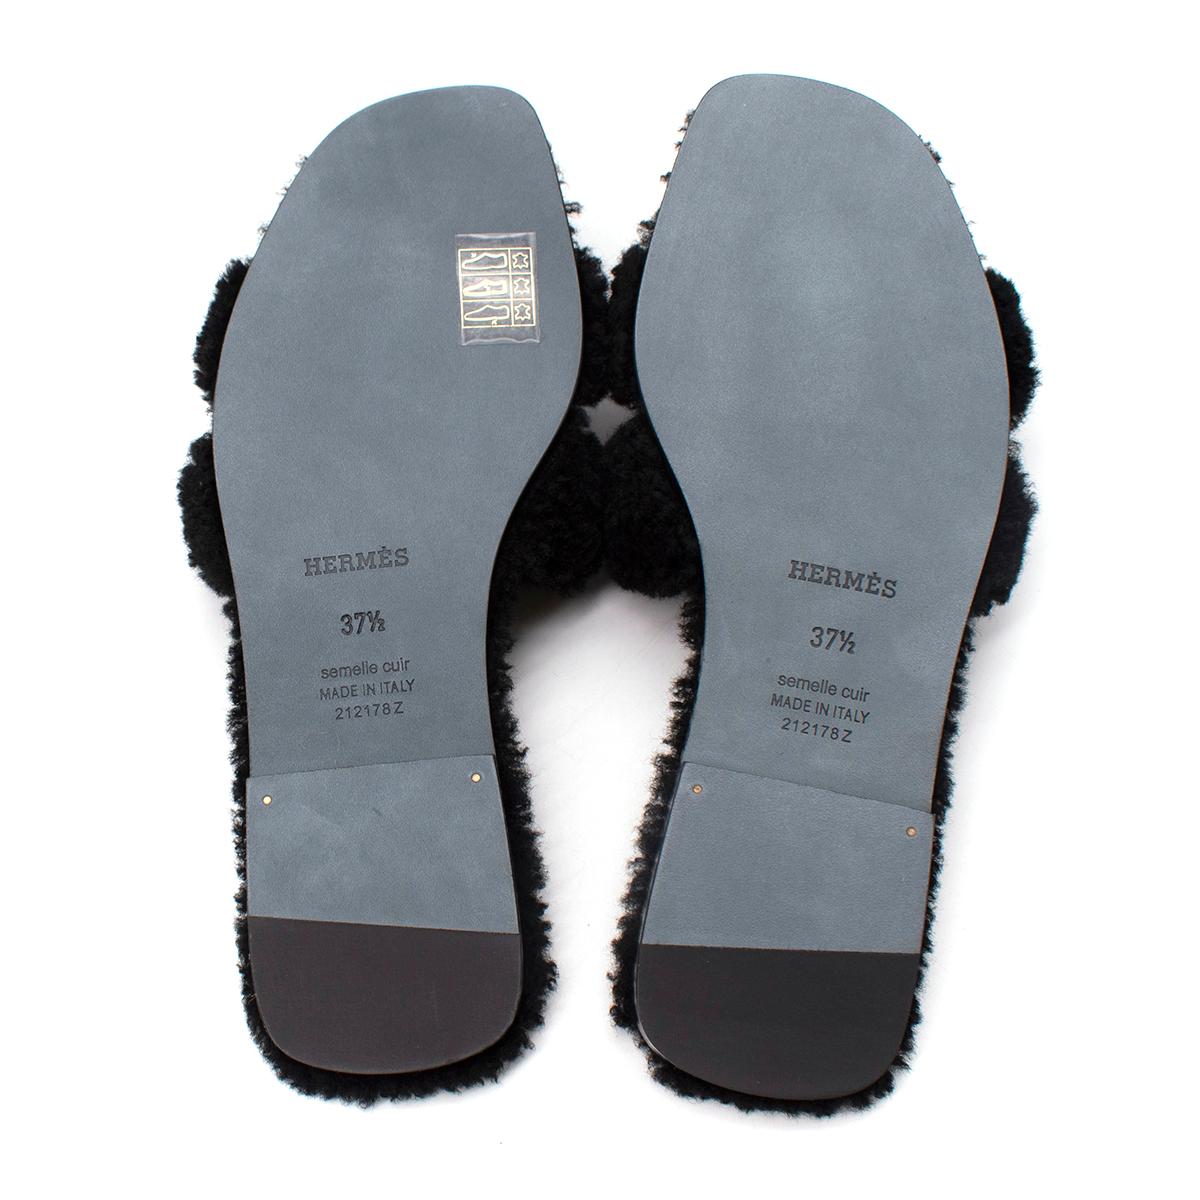 Hermes Black Fluffy Shearling Oran Sandals - Discontinued/Rare - Us size 7.5 1